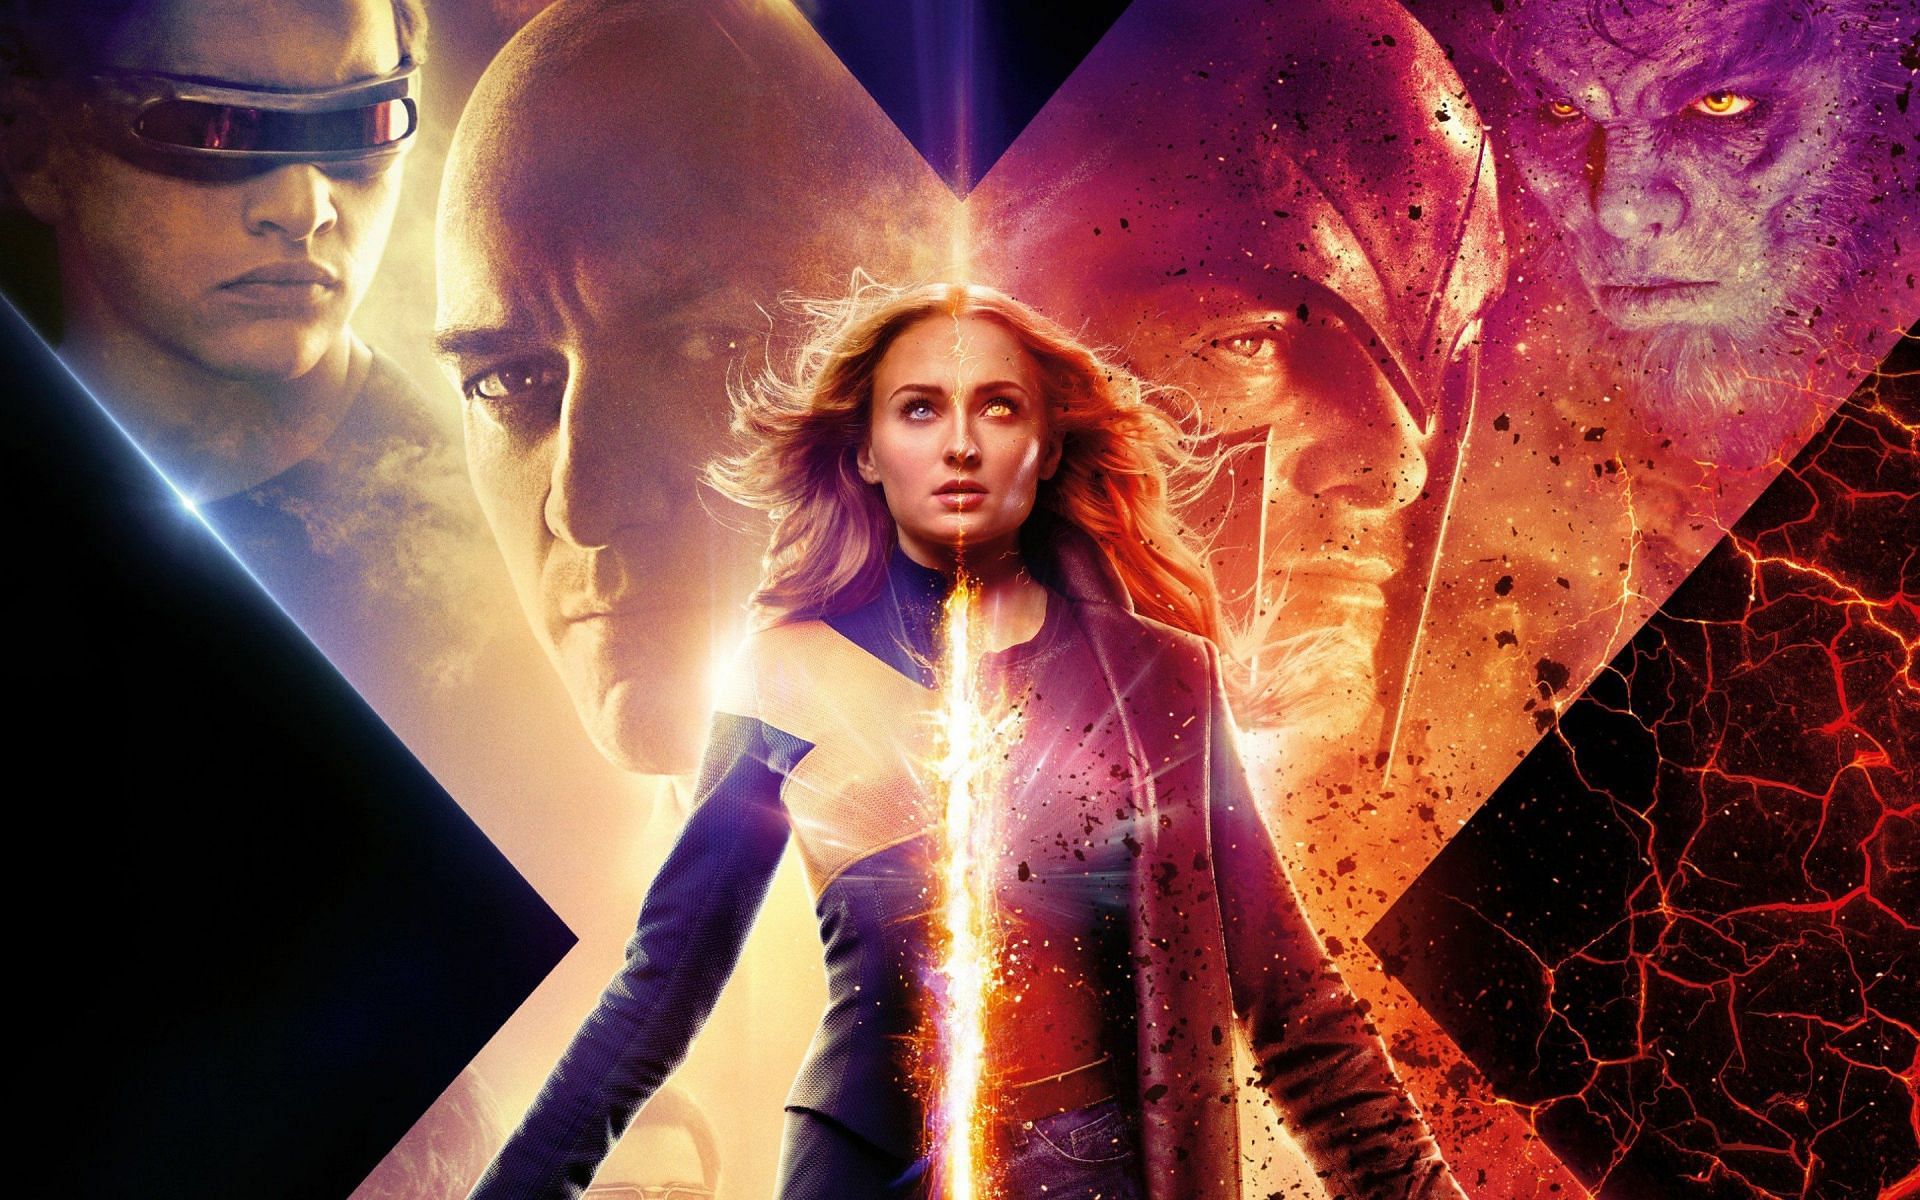 In 2019, Dark Phoenix was released as a movie that explored the Dark Phoenix storyline, from the Marvel comics. (Image via Marvel)